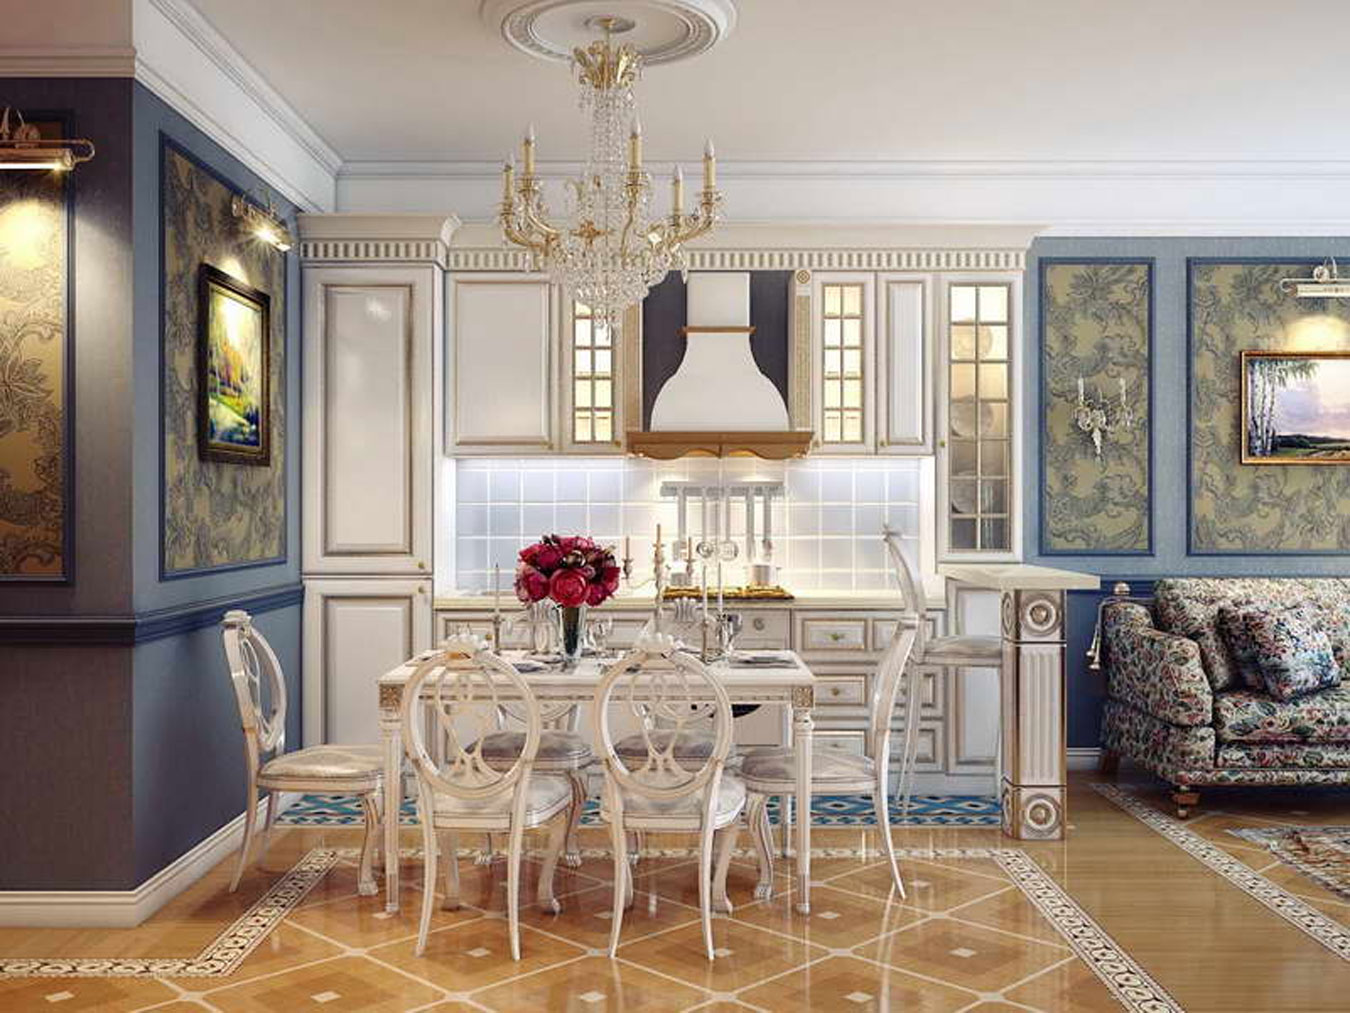 Dining Room Piece Adorable Dining Room Sets 6 Piece Design Ideas With Beautiful White Dining Room Table Design And Lovable Wood Chair Padded Seat Ideas Also Glamorous Chandelier Ideas Plus Cute Flower Vase Idea Dining Room Modern Dining Room Furniture Design